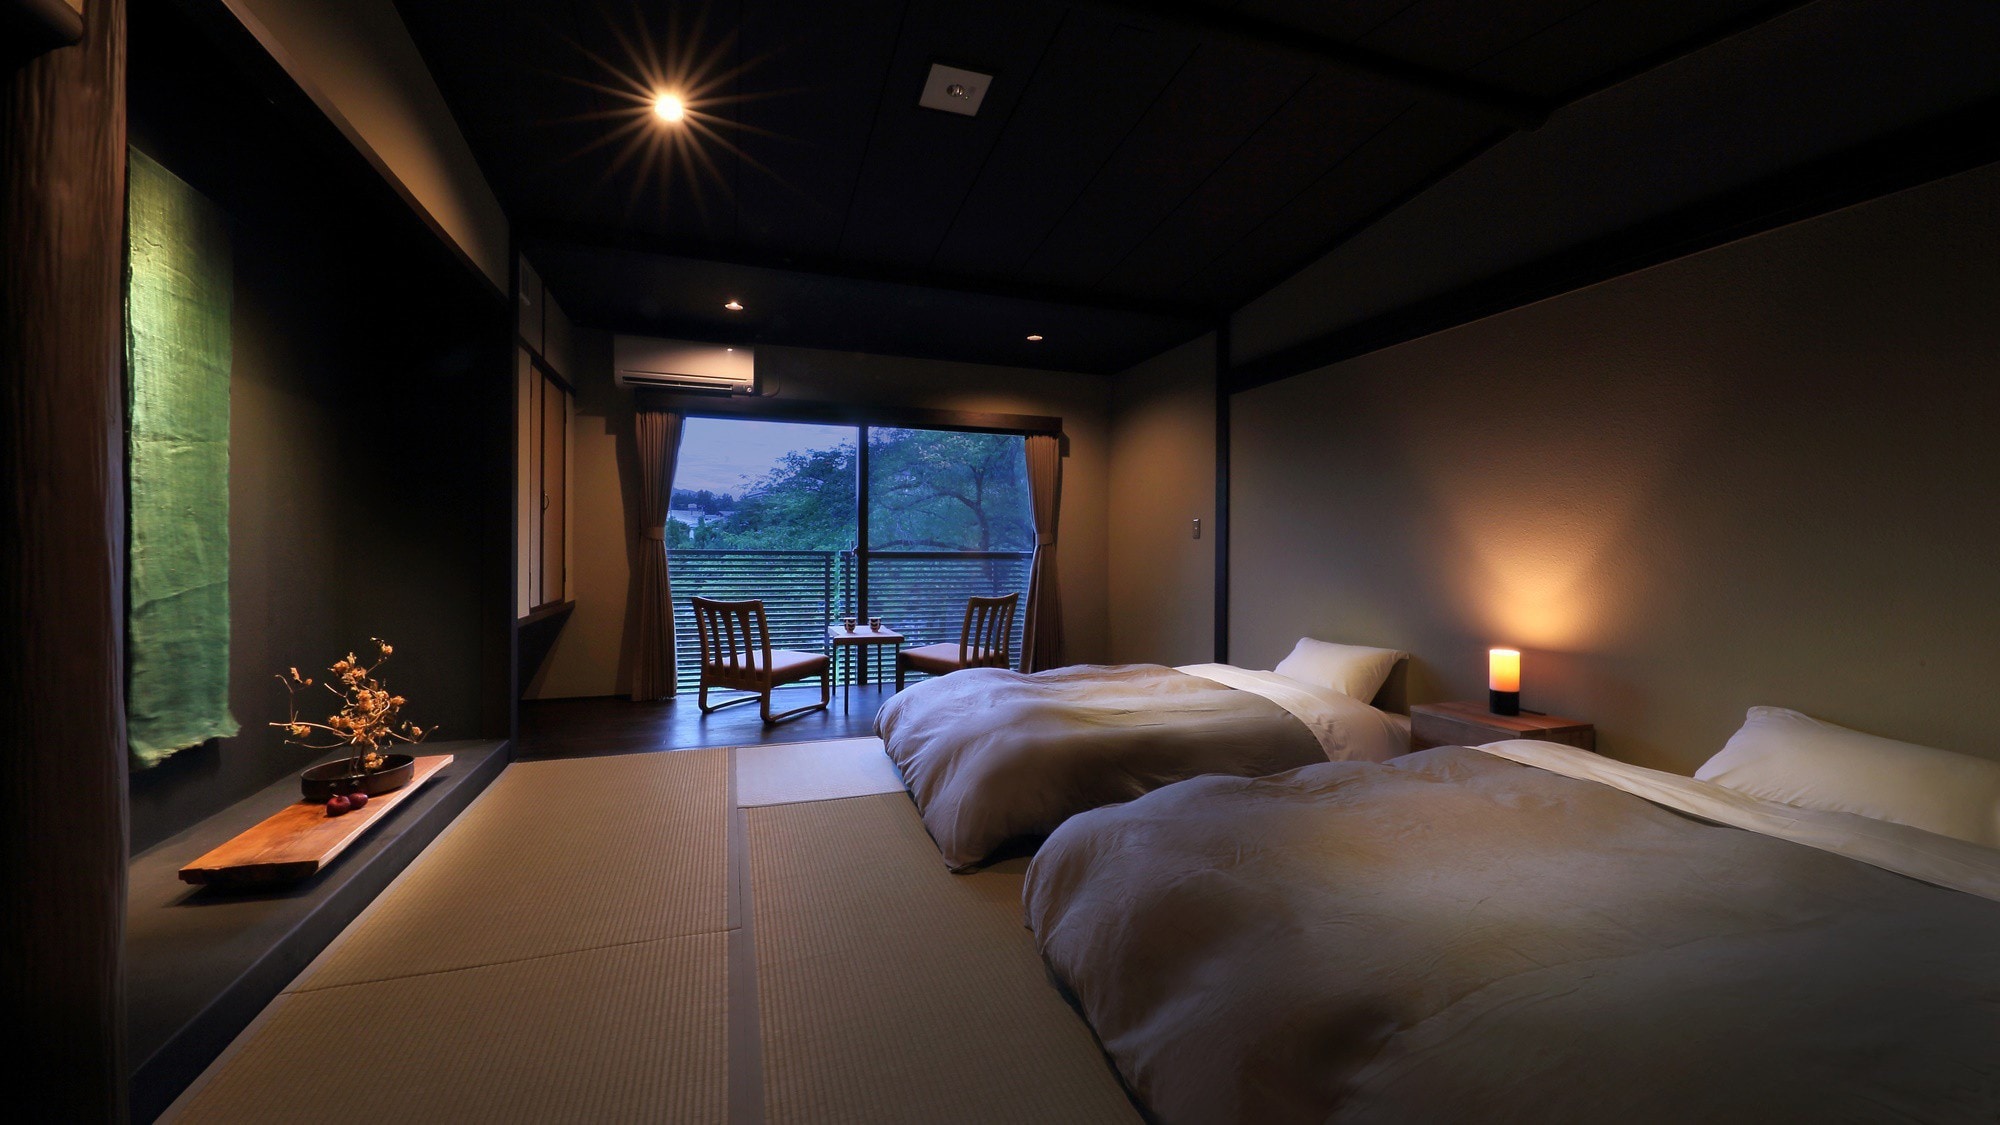 [With moderate bath] There are two modern low-rise beds and a wide veranda. You can also relax in the indoor bath.